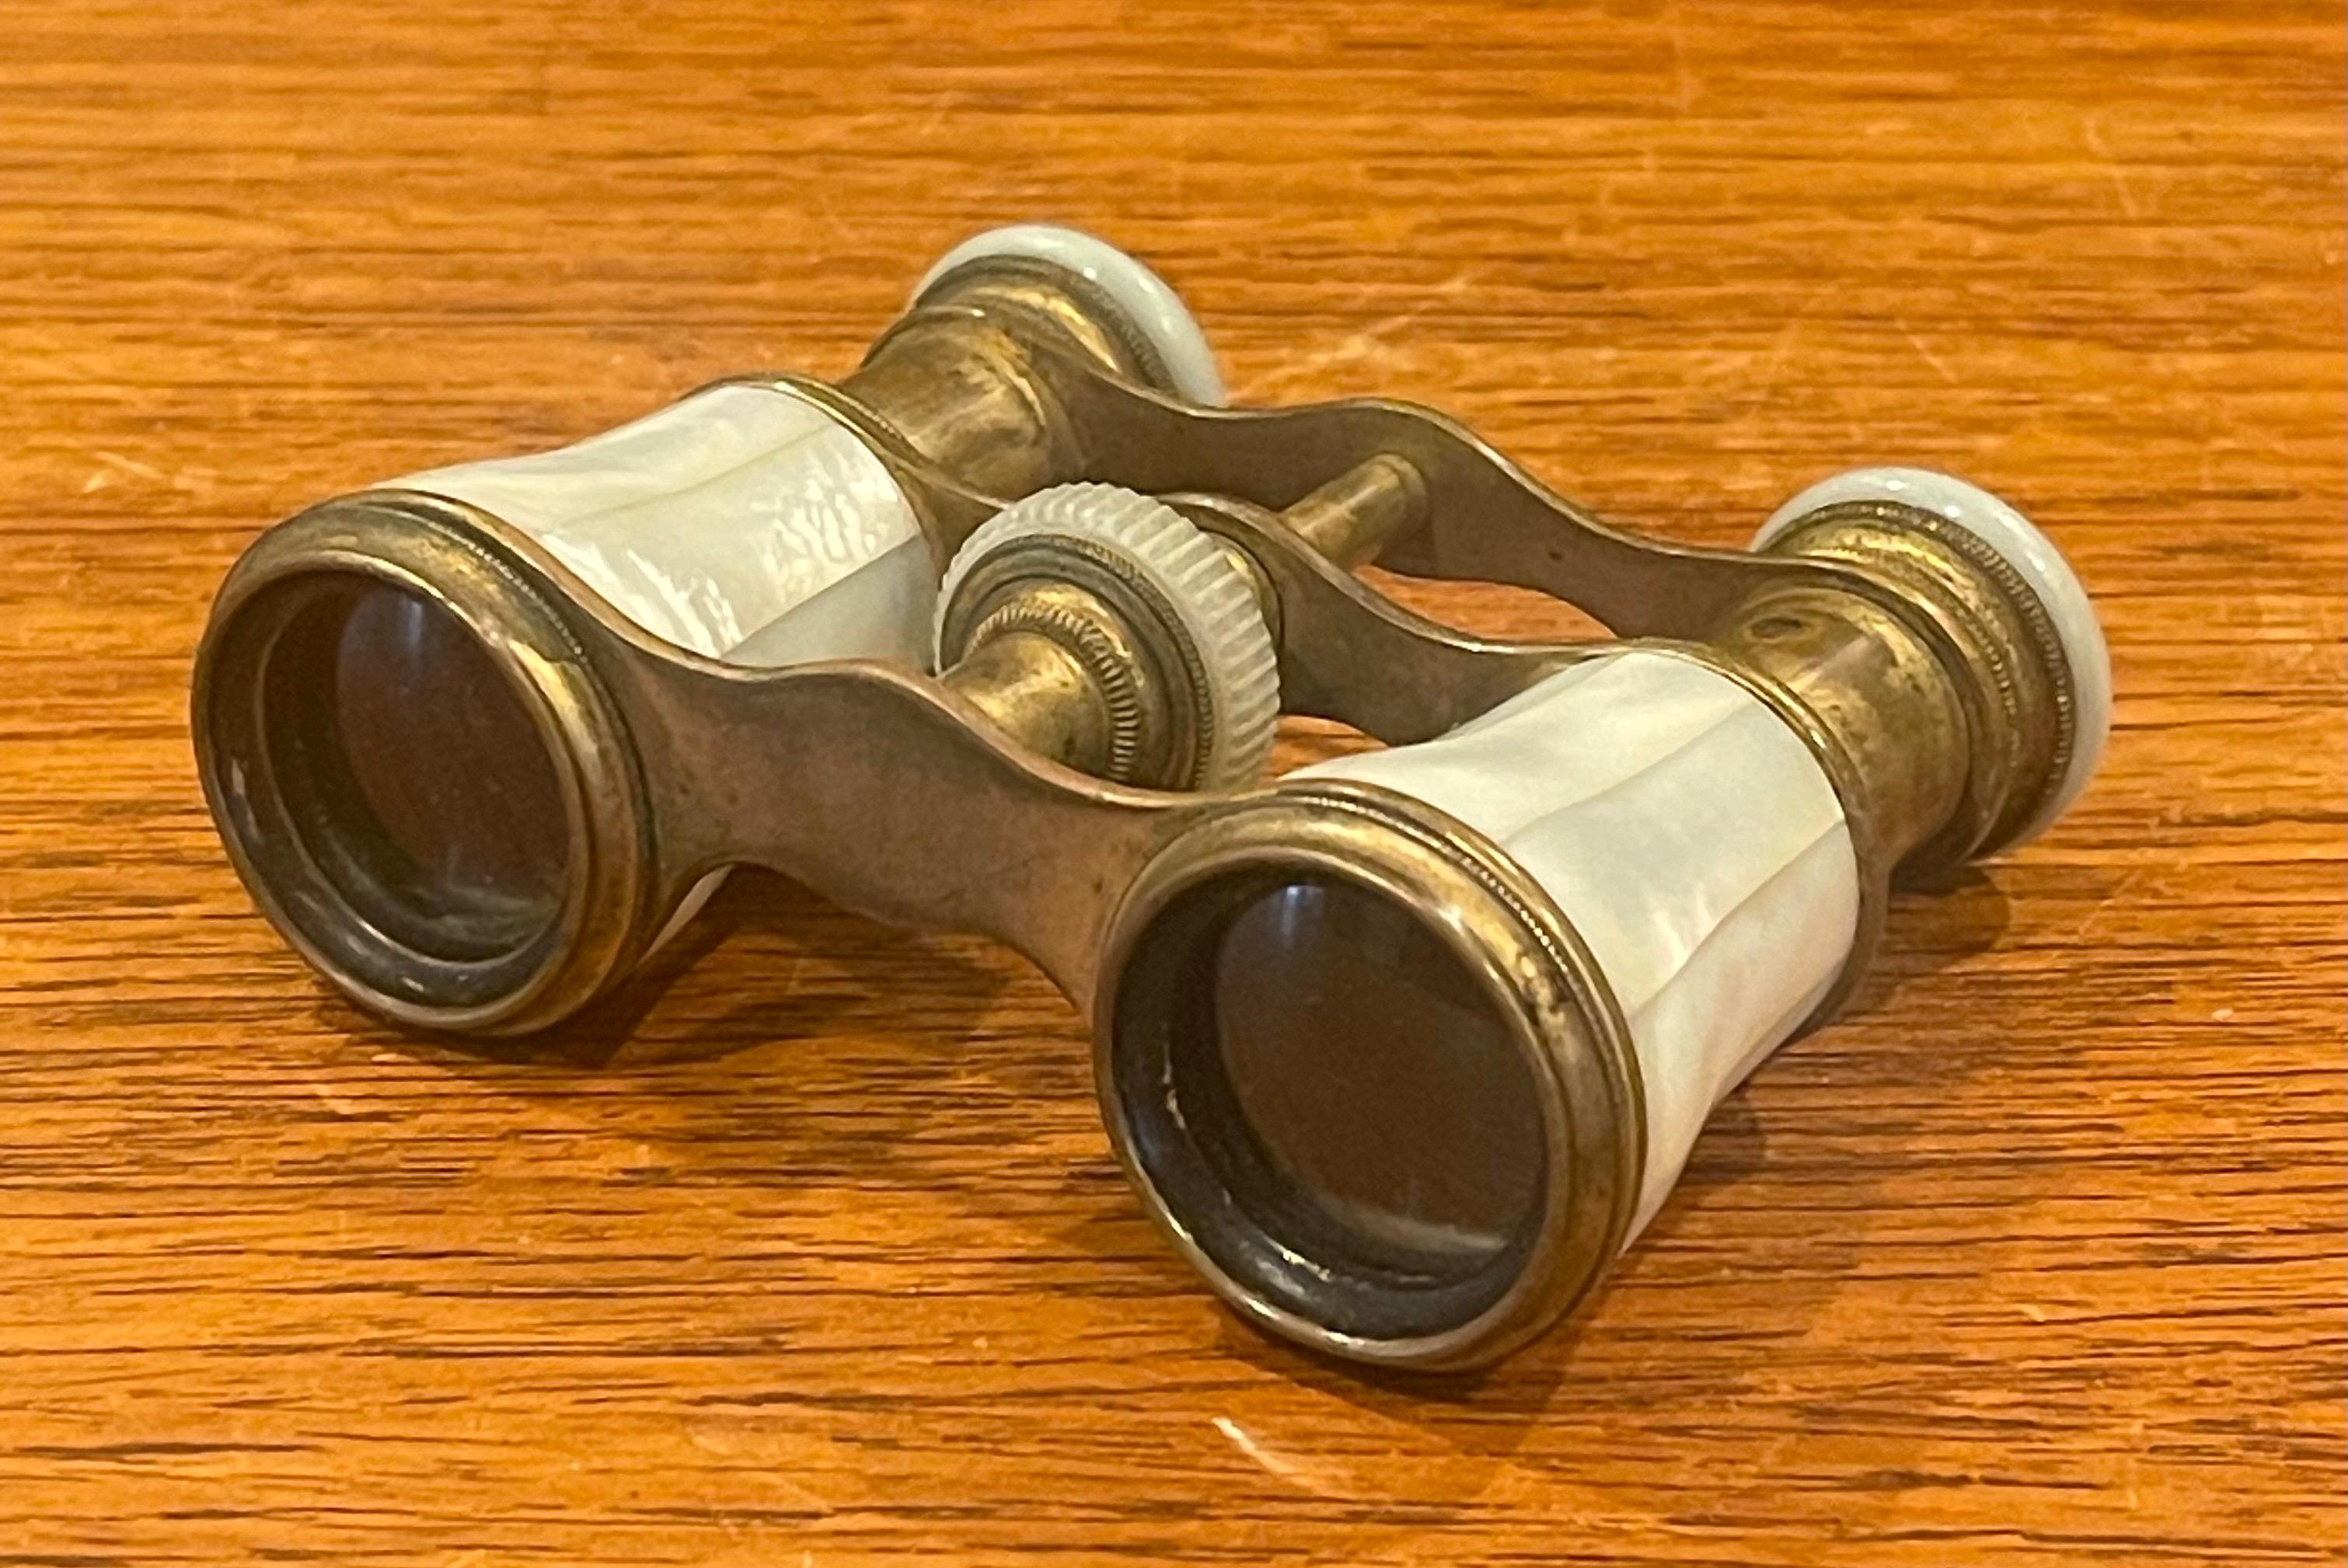 Fabulous vintage French mother-of-pearl and brass opera glasses by LeClaire of Paris, circa 1950s. #2727

Complete functional glasses, the lenses may need some cleaning but this does not affect the clear view; focus bar works great. This stunning